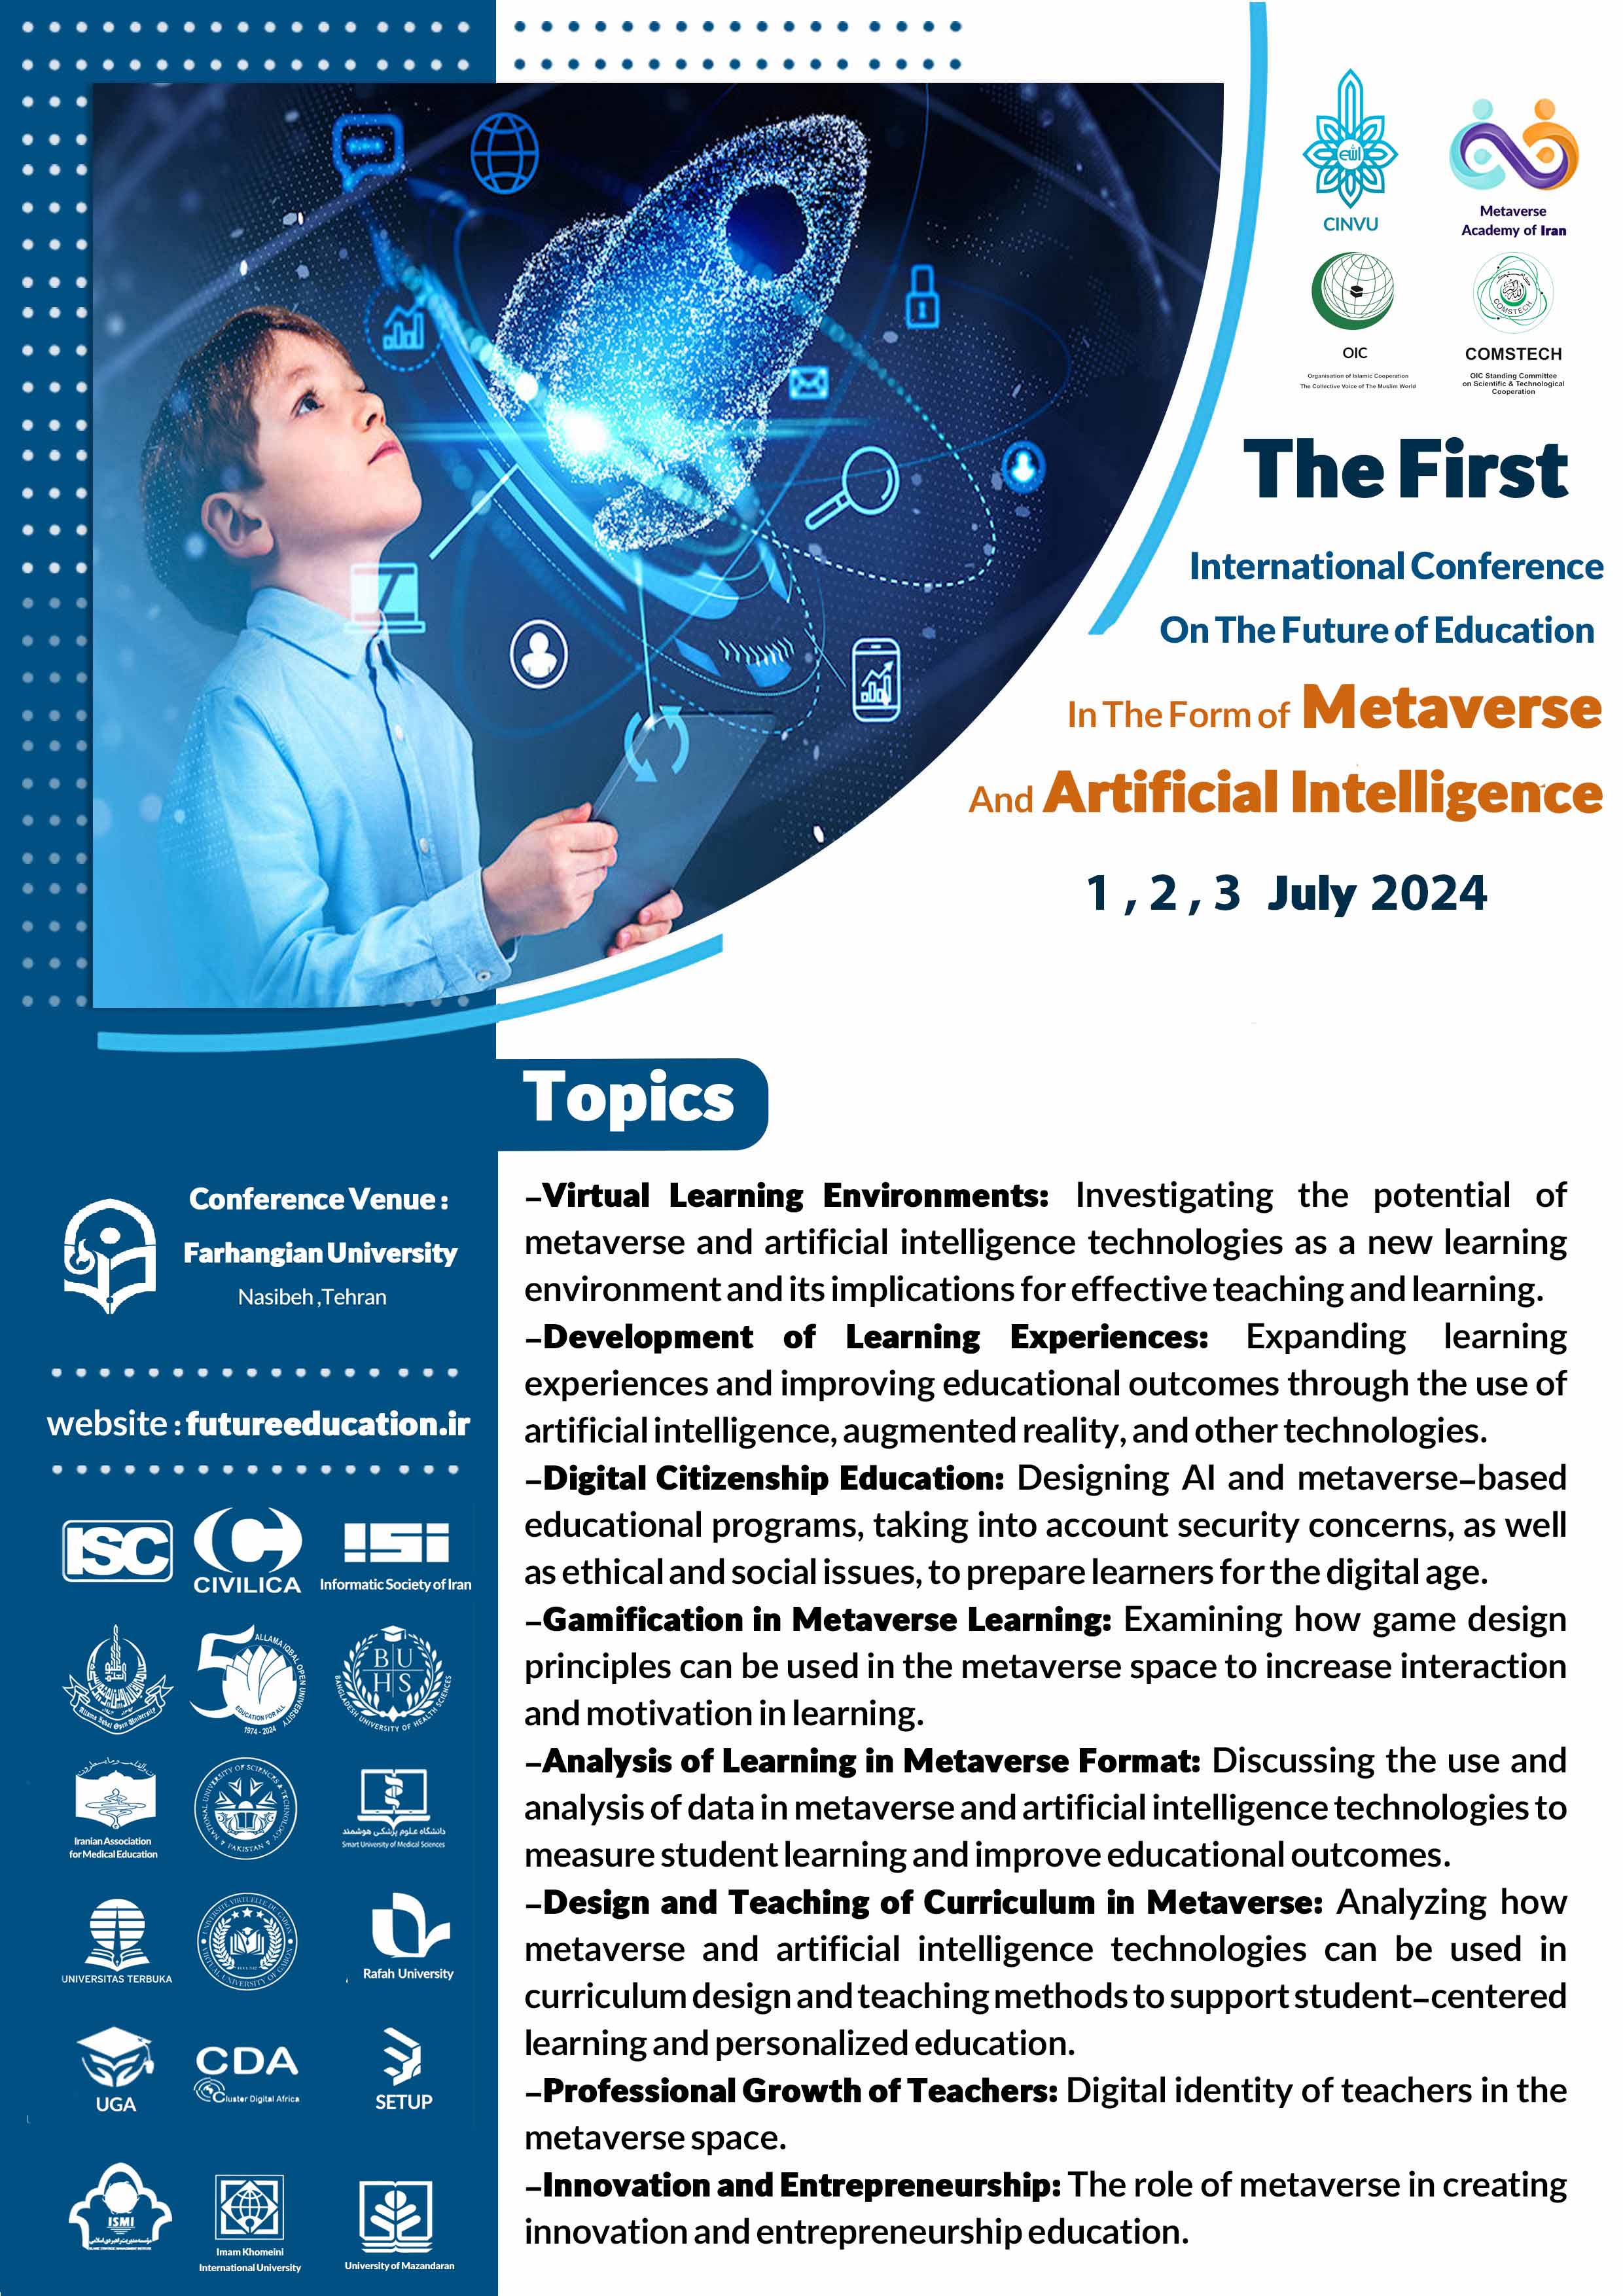 The First International Conference On The Future of Education In The Form of Metaverse And Artificial Intelligence